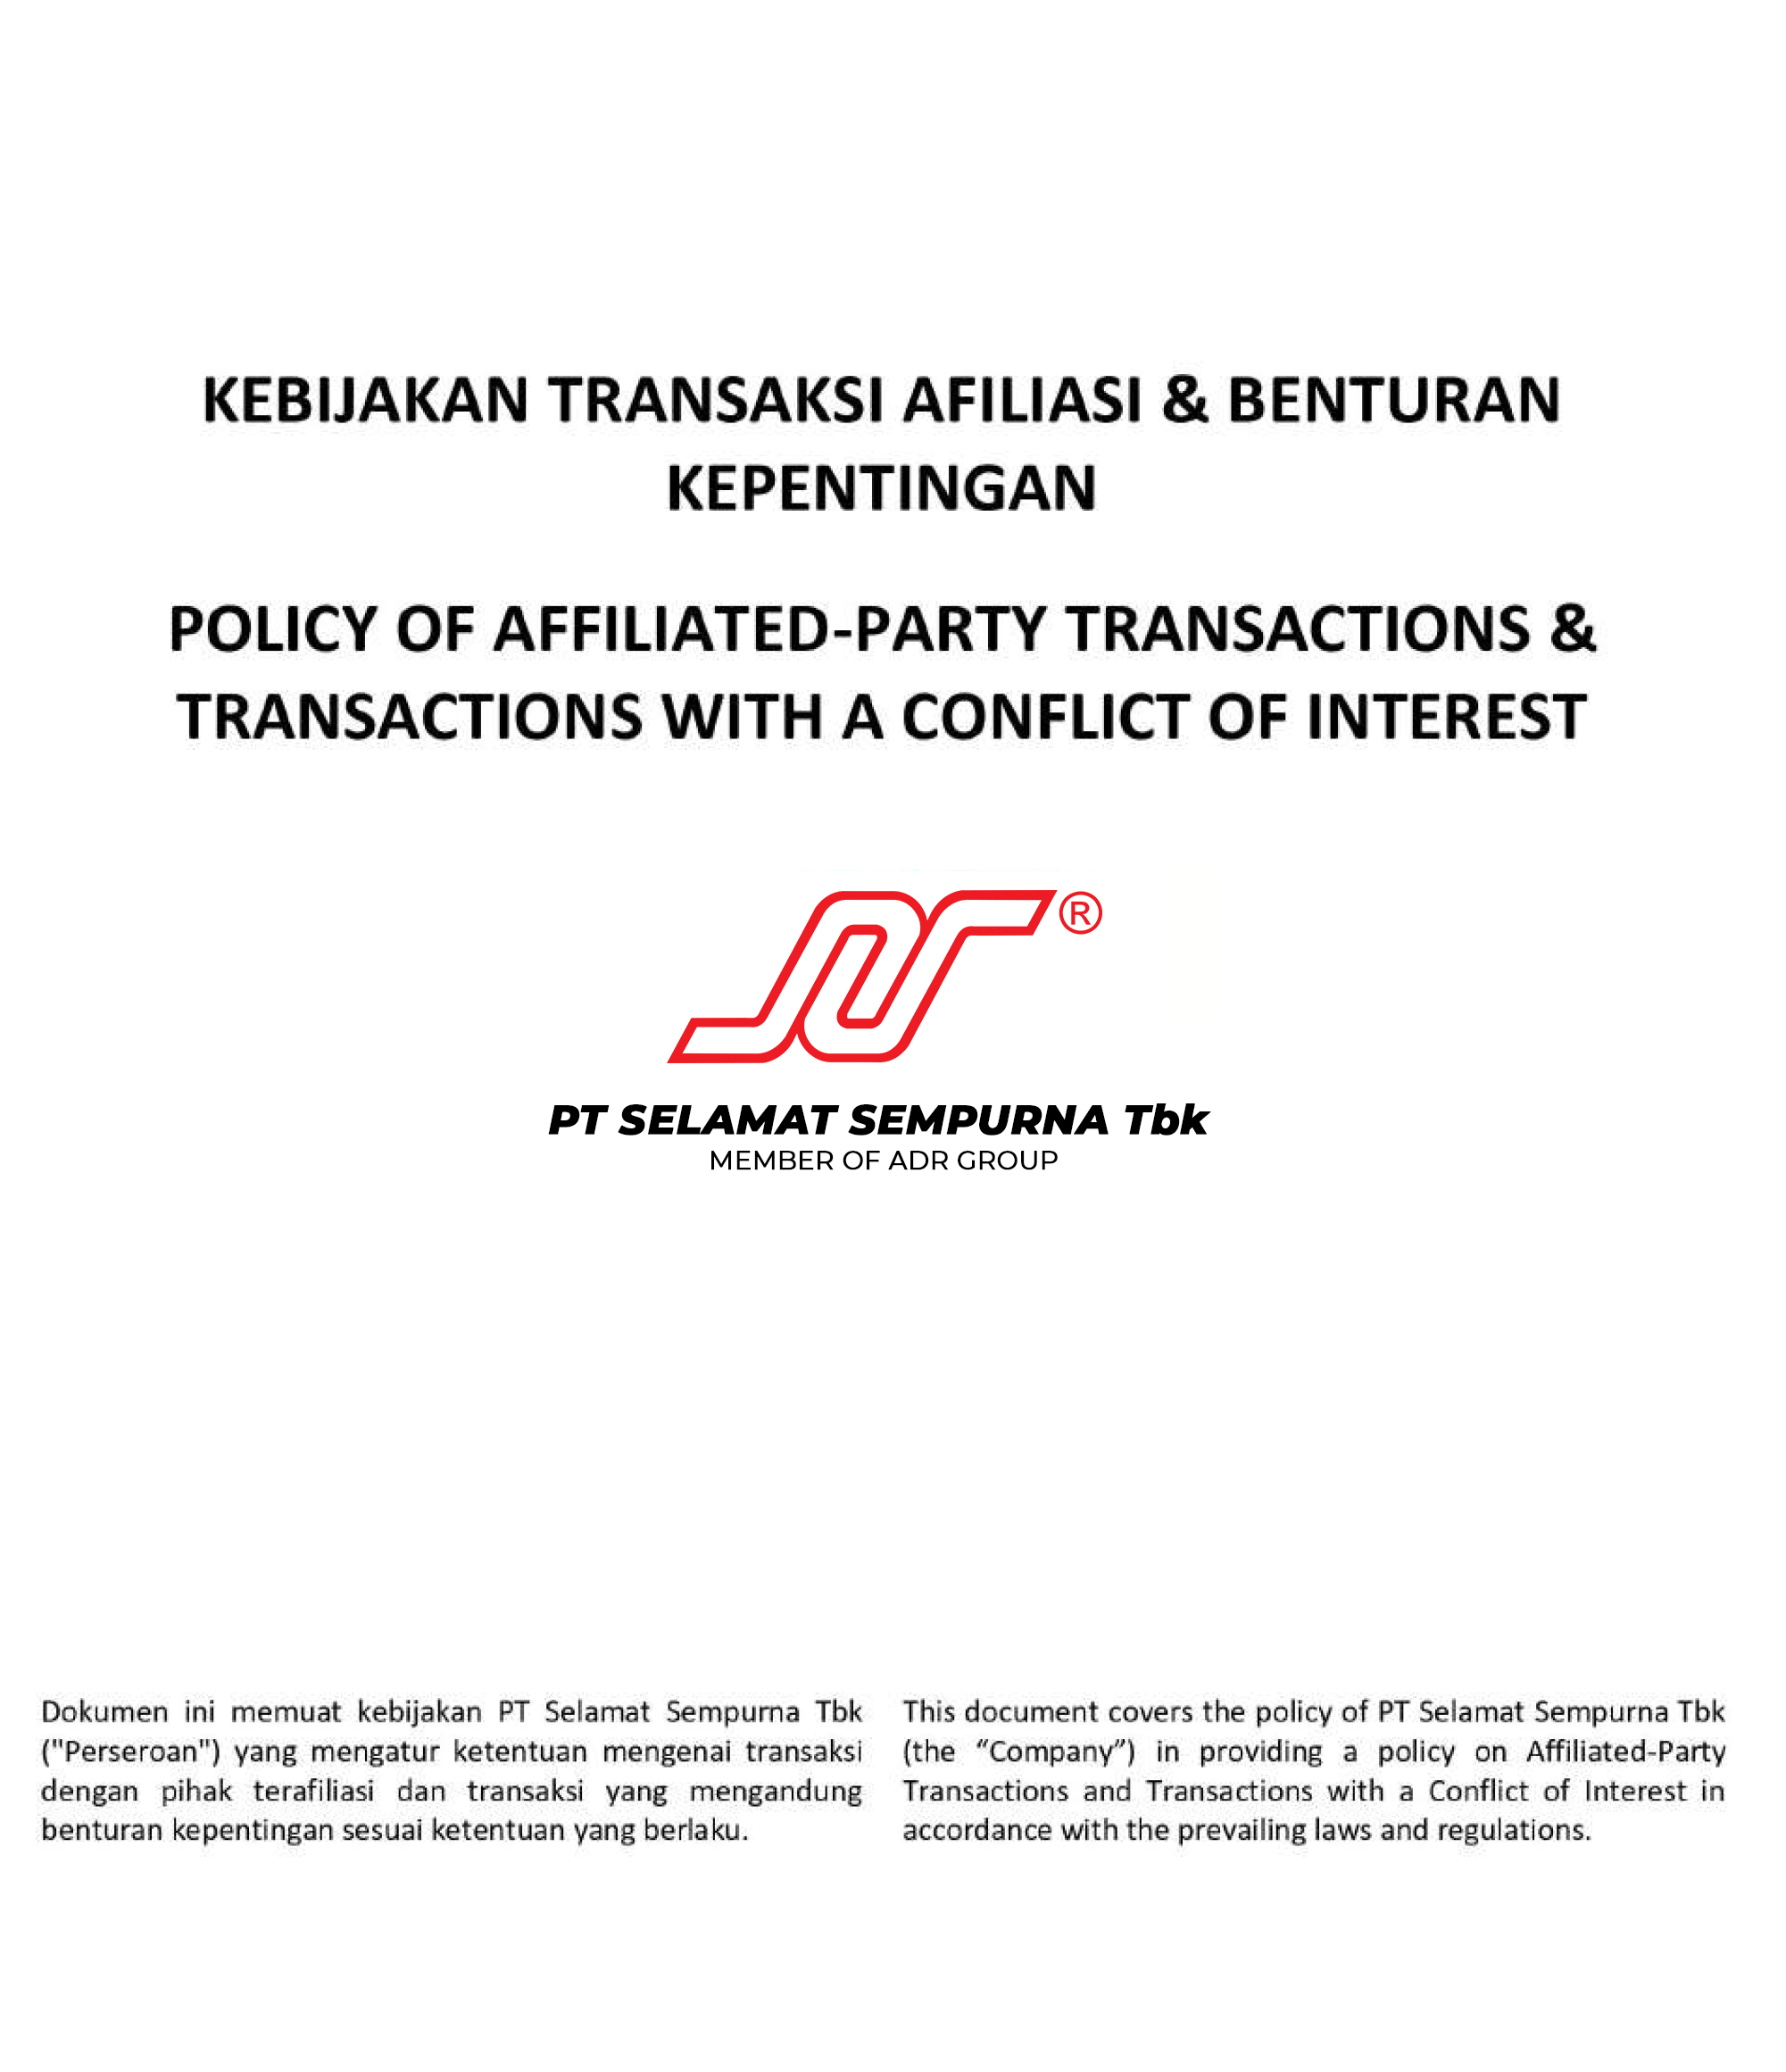 Affiliated-Party & Conflict of Interest Transactions Policy